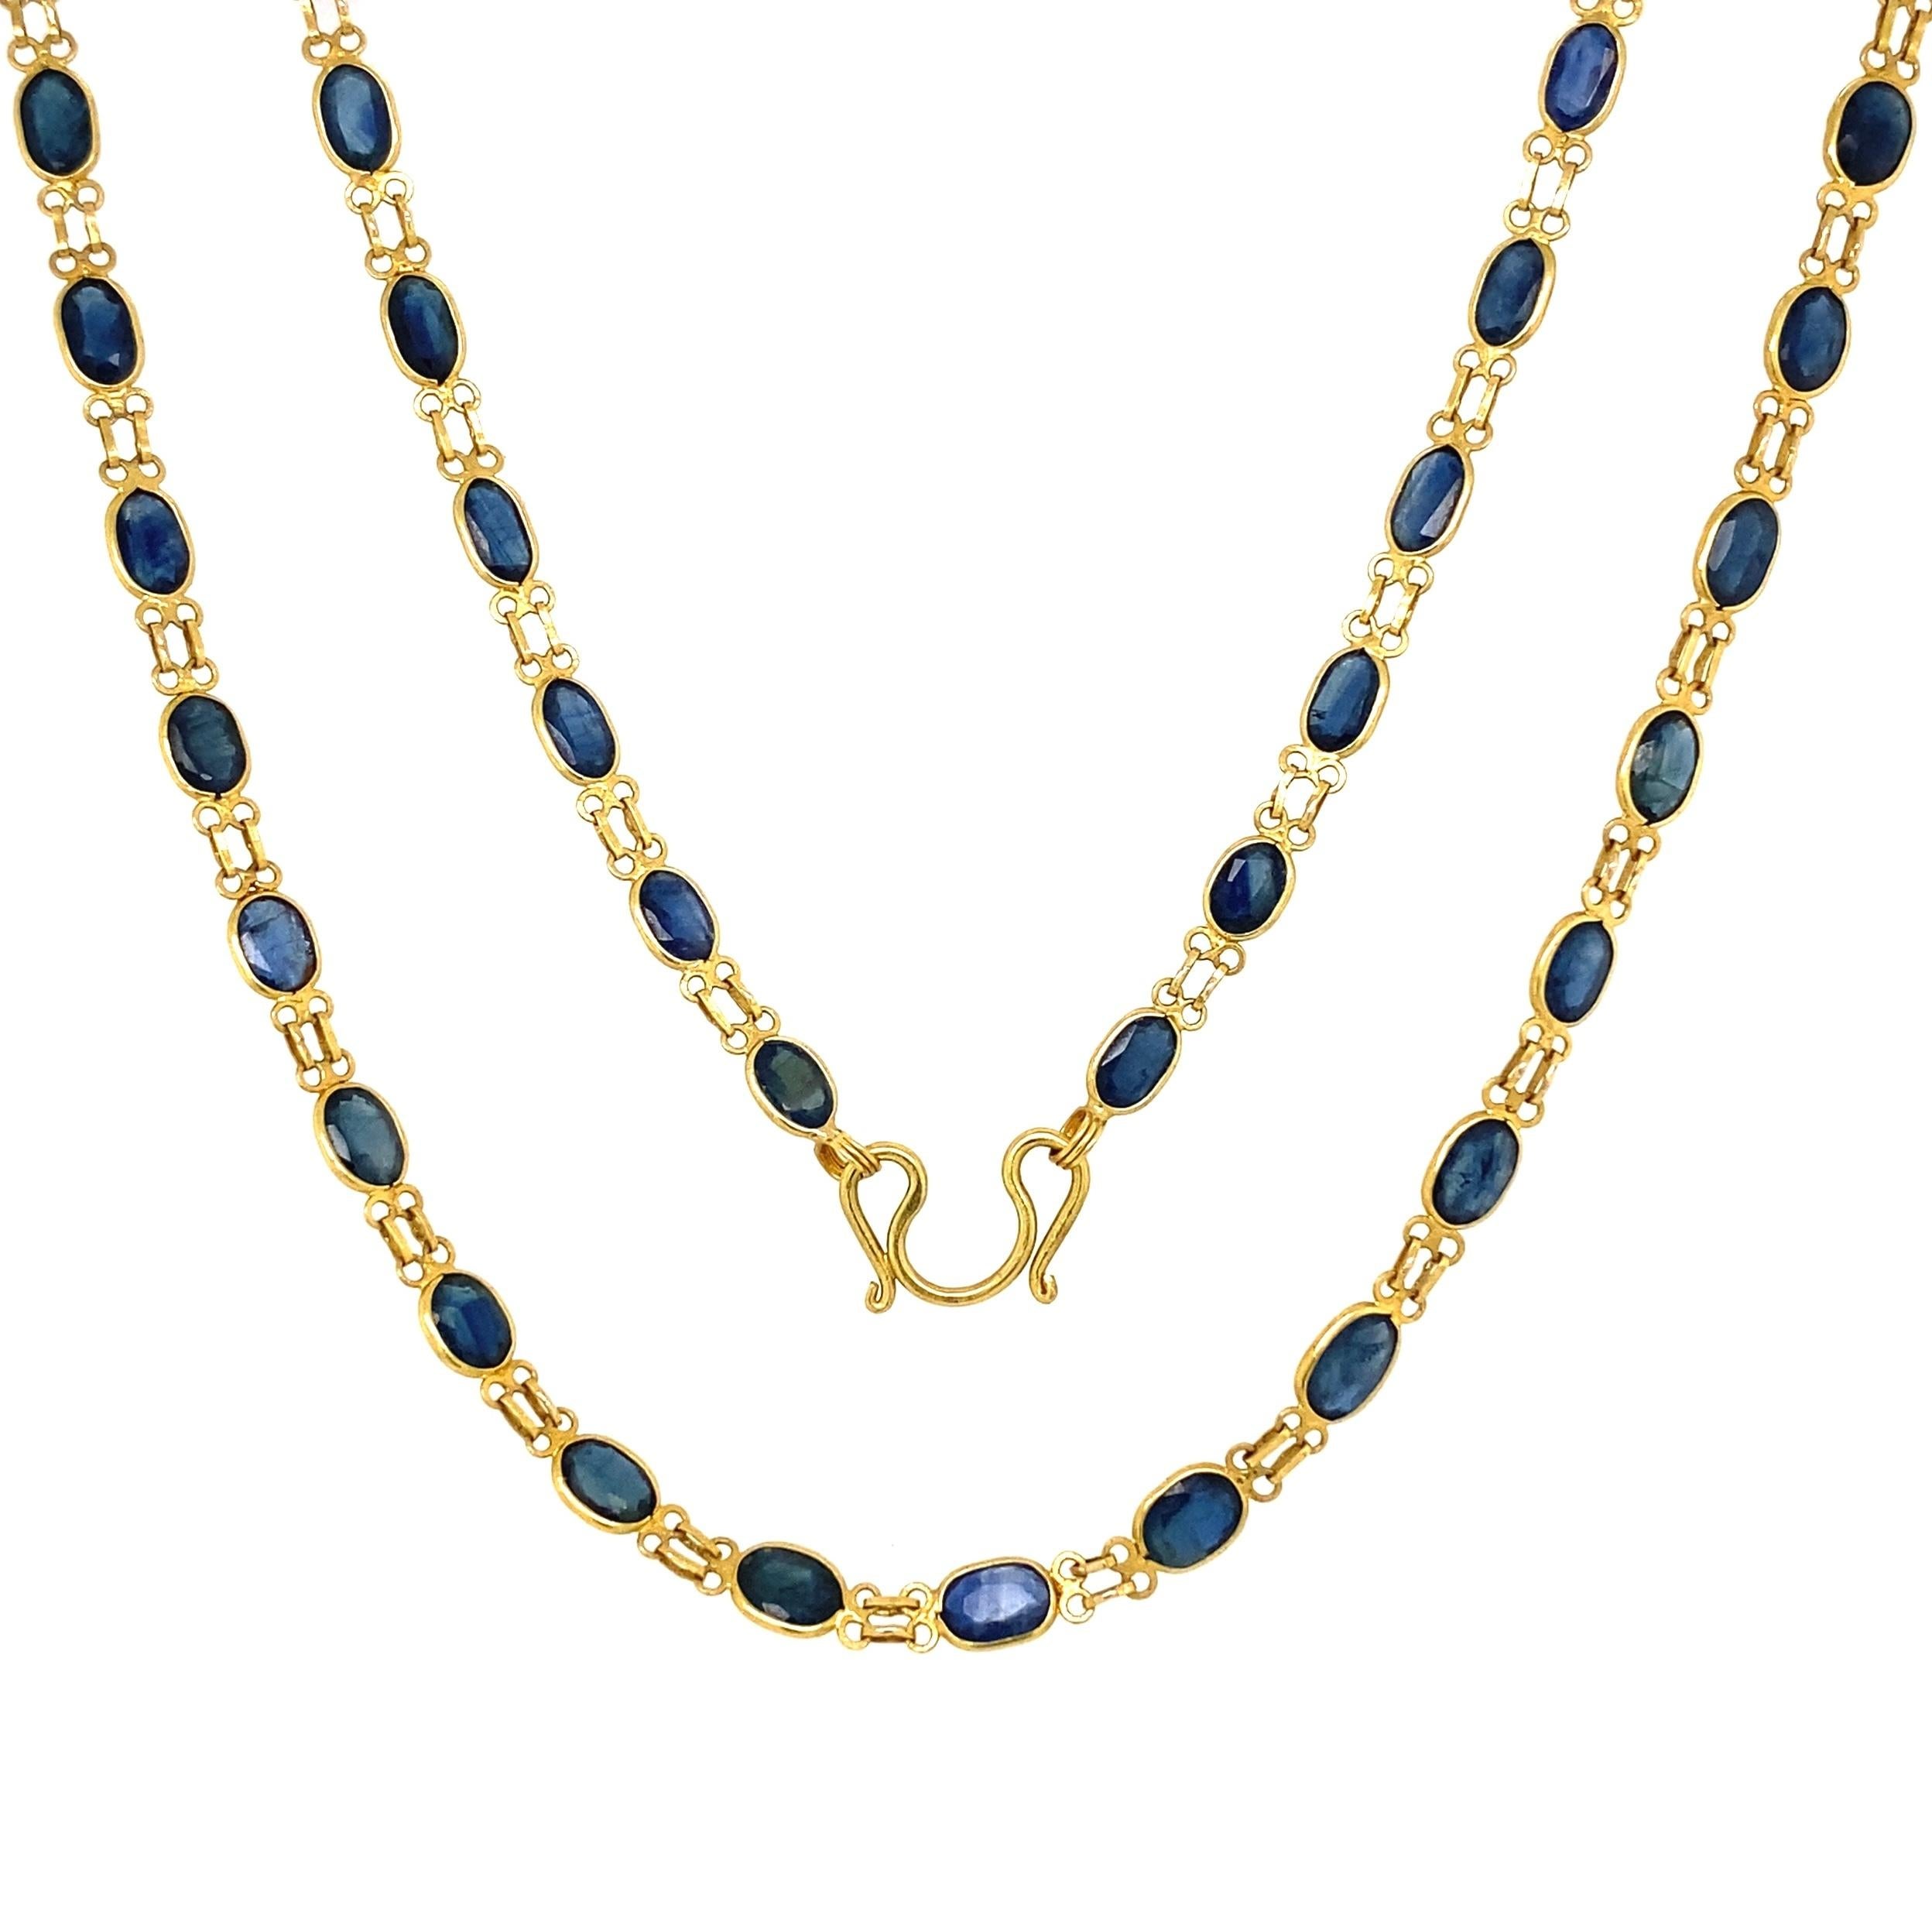 Beautiful, Classic and Chic Long Gold Chain inter-spaced with 70 Oval Blue Sapphires weighing approx. 20tcw. Necklace measures 27” long. Hand set Sapphires and Hand crafted ion 22K yellow Gold. So easy to wear...A piece you'll turn to time and time